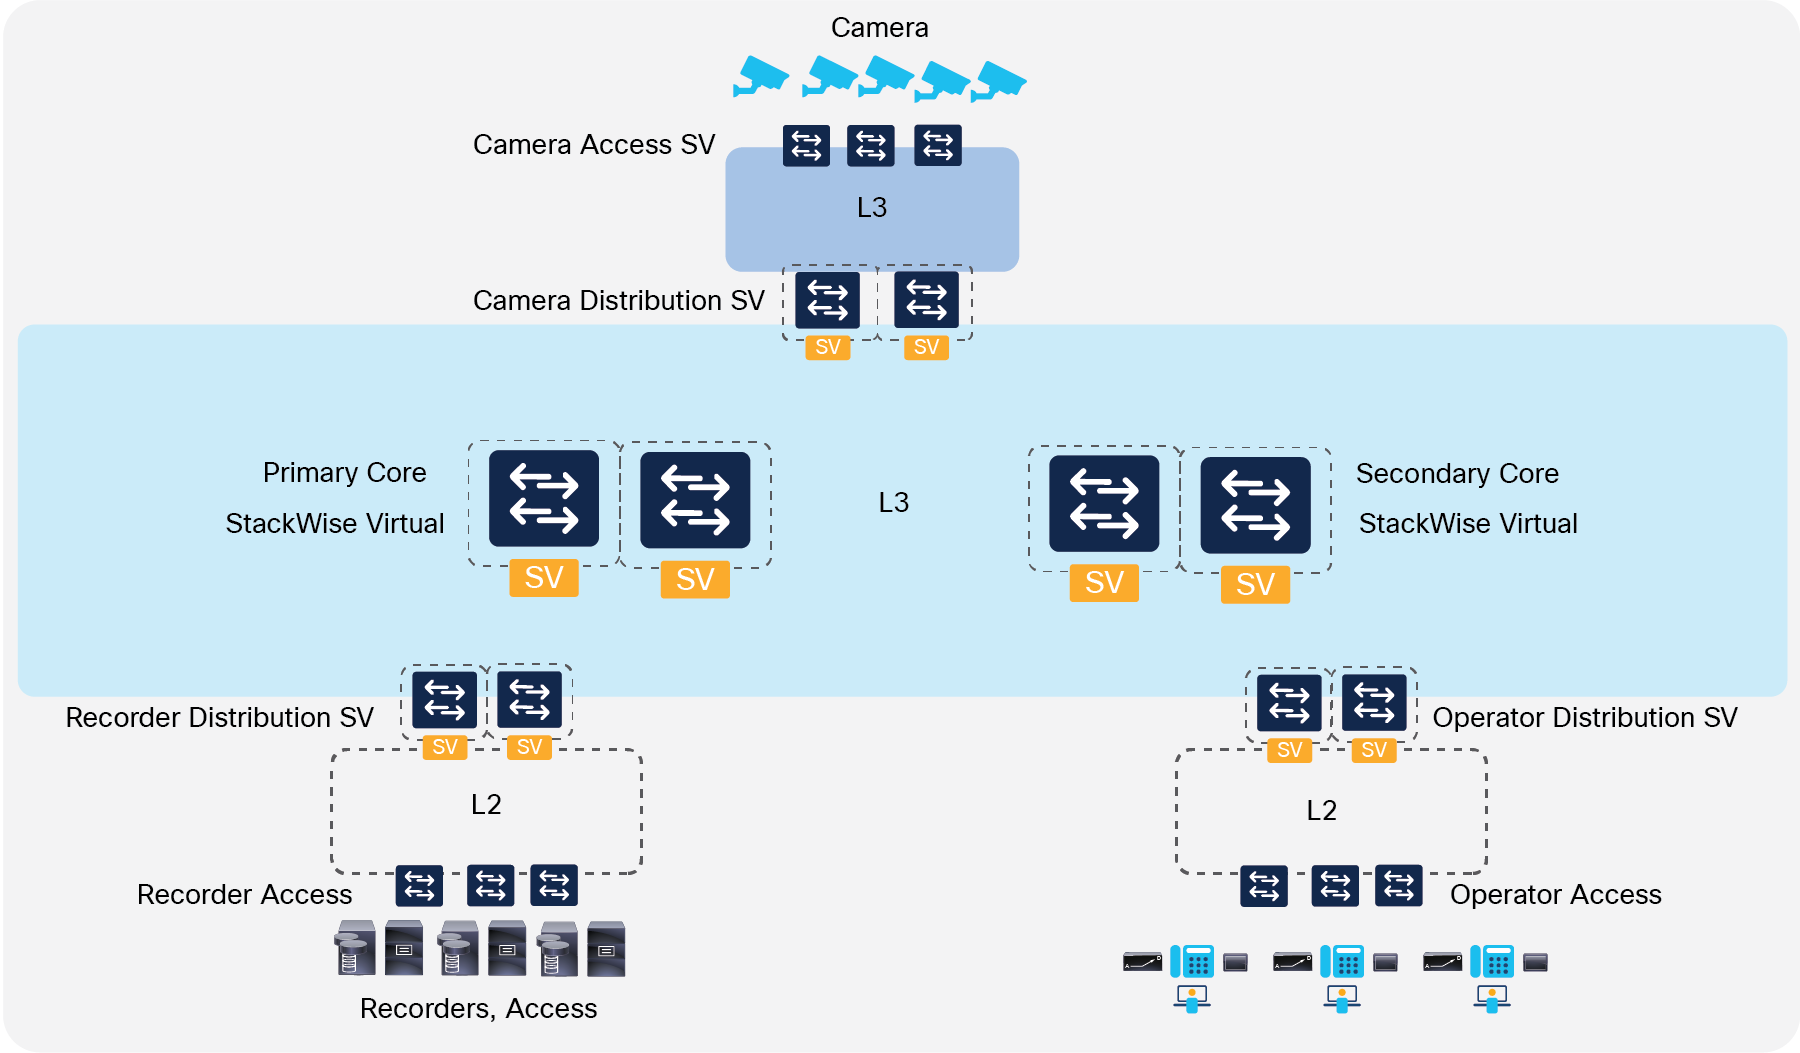 Design option 1: StackWise Virtual in a 3-tier architecture